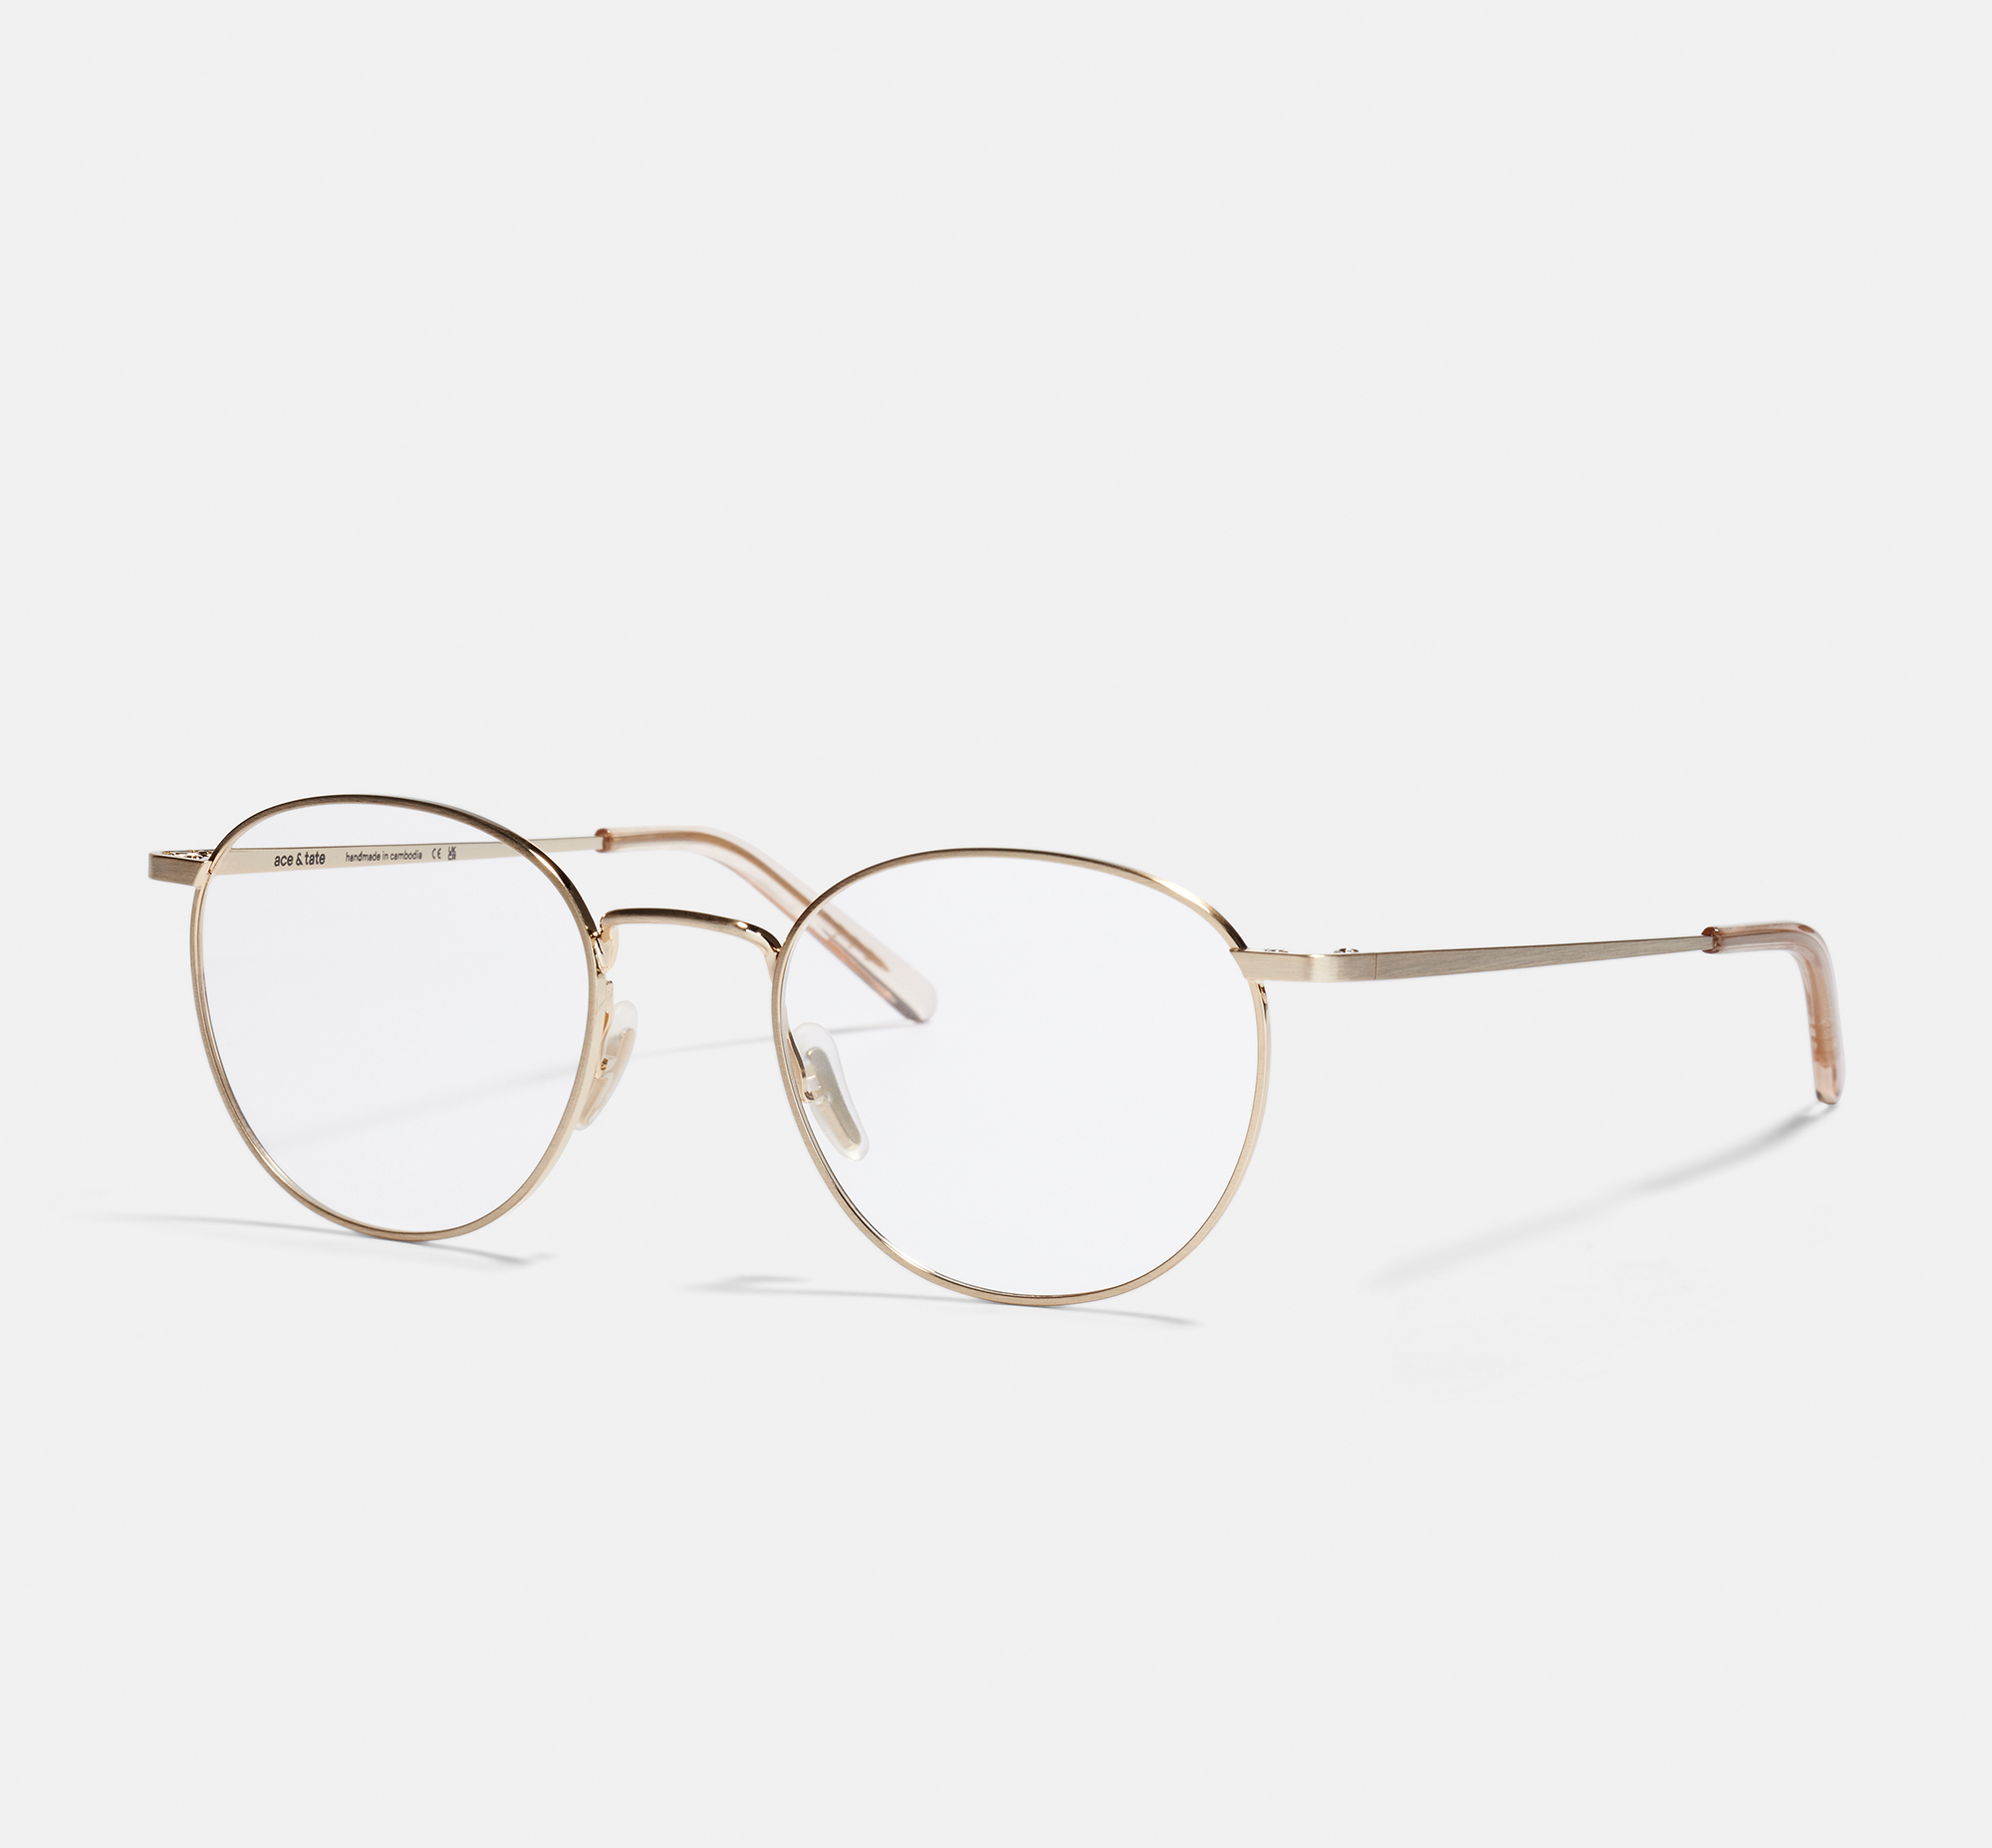 Lernert & Sander x Ace & Tate to Release Eyewear Collection